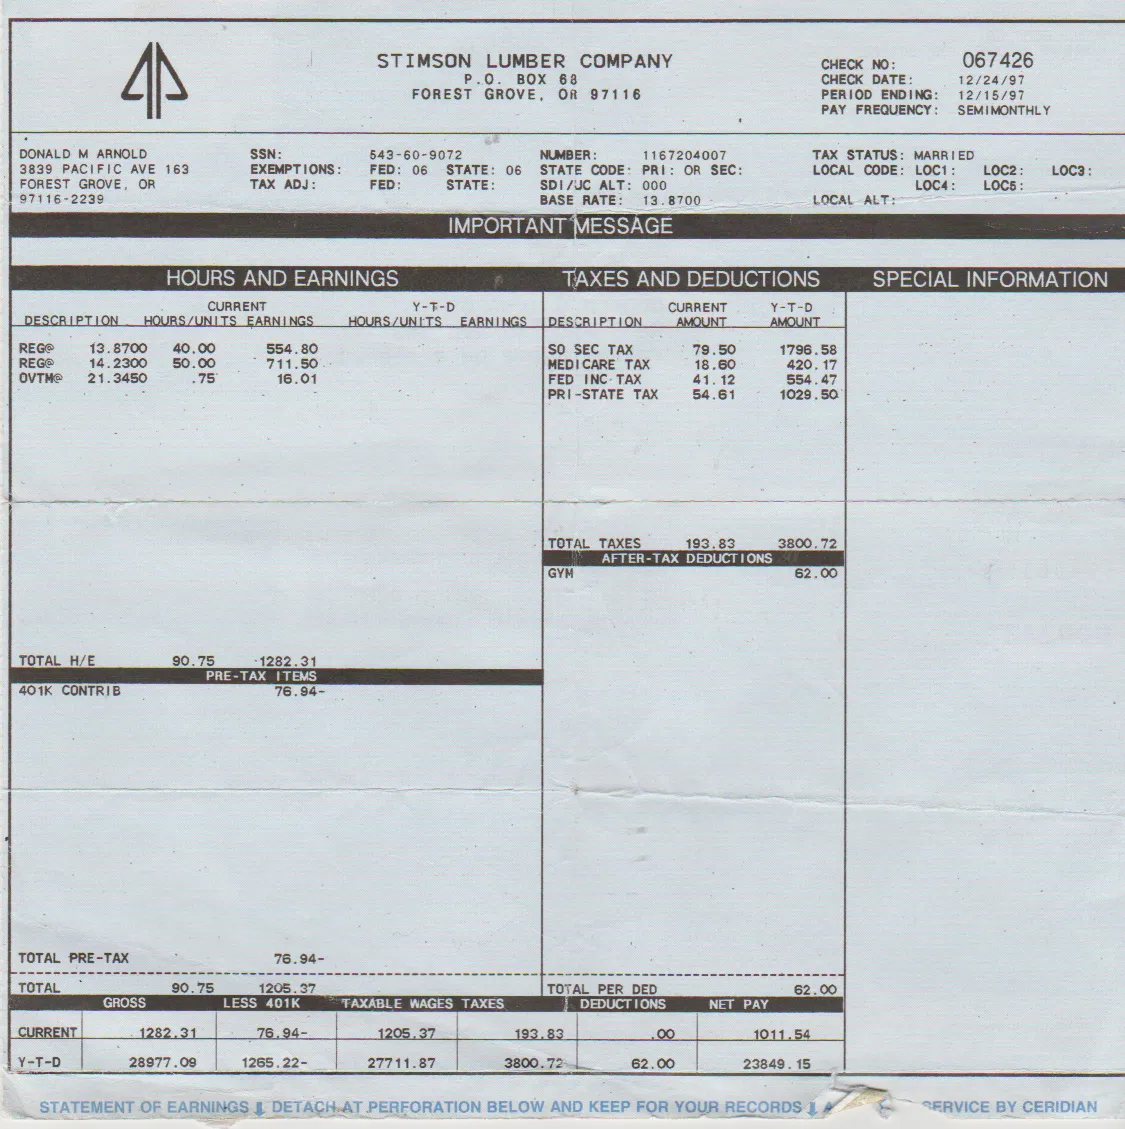 1997-12-24 - Wednesday - Stimpson Lumber Company - YTD - Earnings, Taxes-1.png